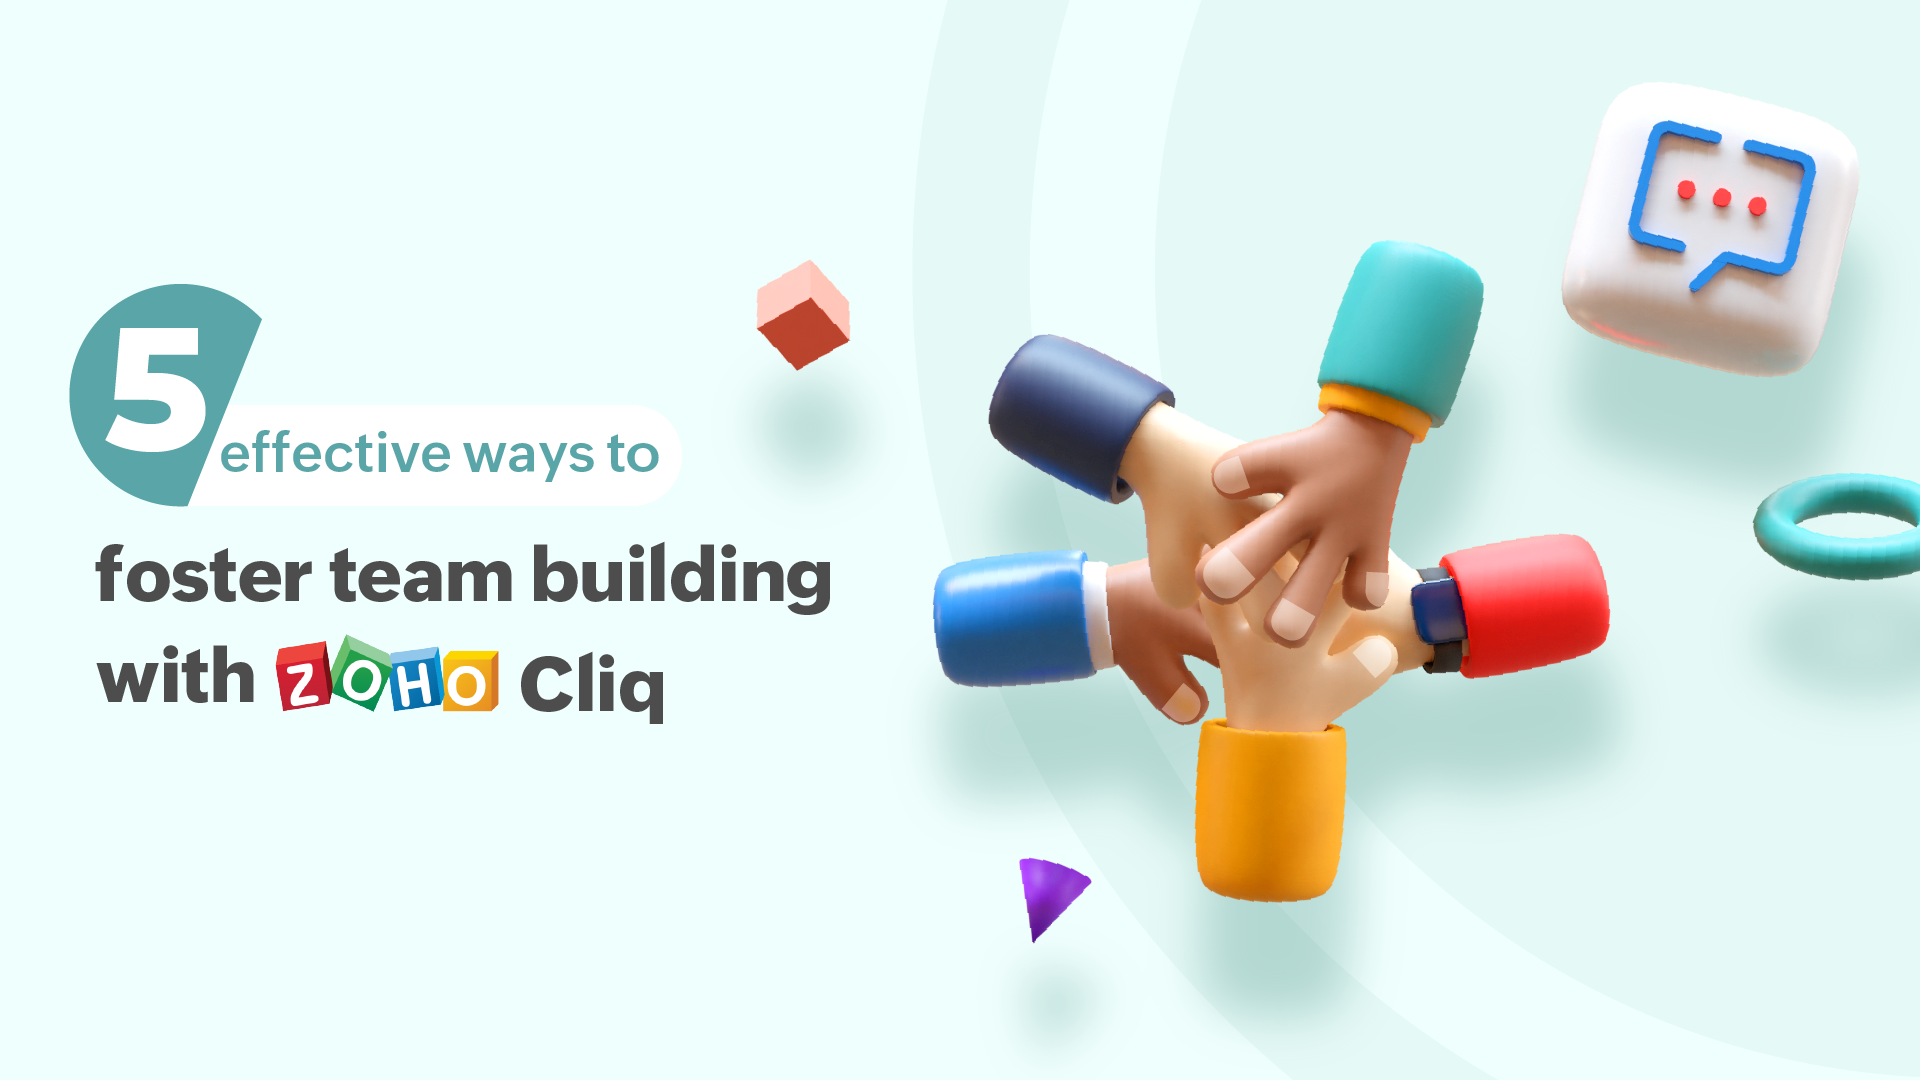 5 effective ways to foster team building with Zoho Cliq